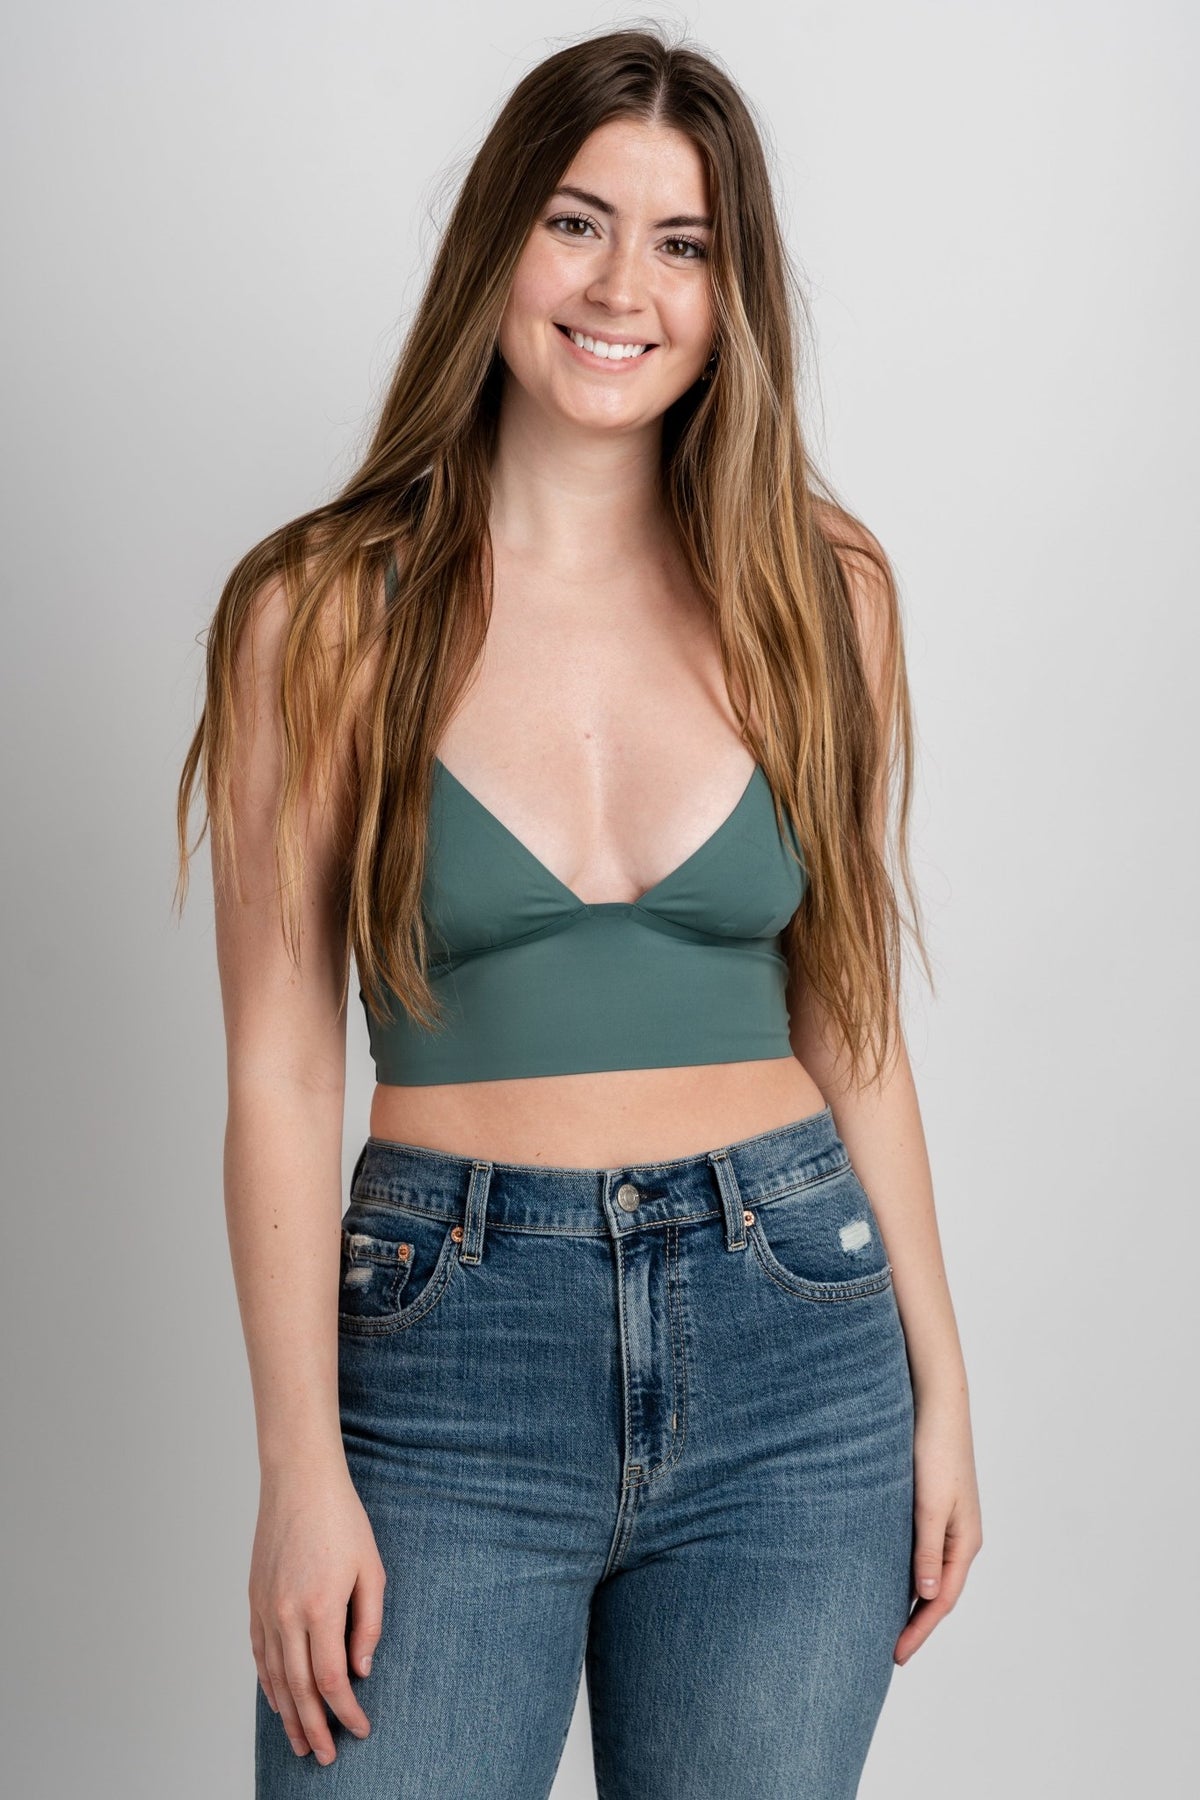 Triangle bralette misty sage - Cute Bralette - Trendy Bras and Bralettes at Lush Fashion Lounge Boutique in Oklahoma City